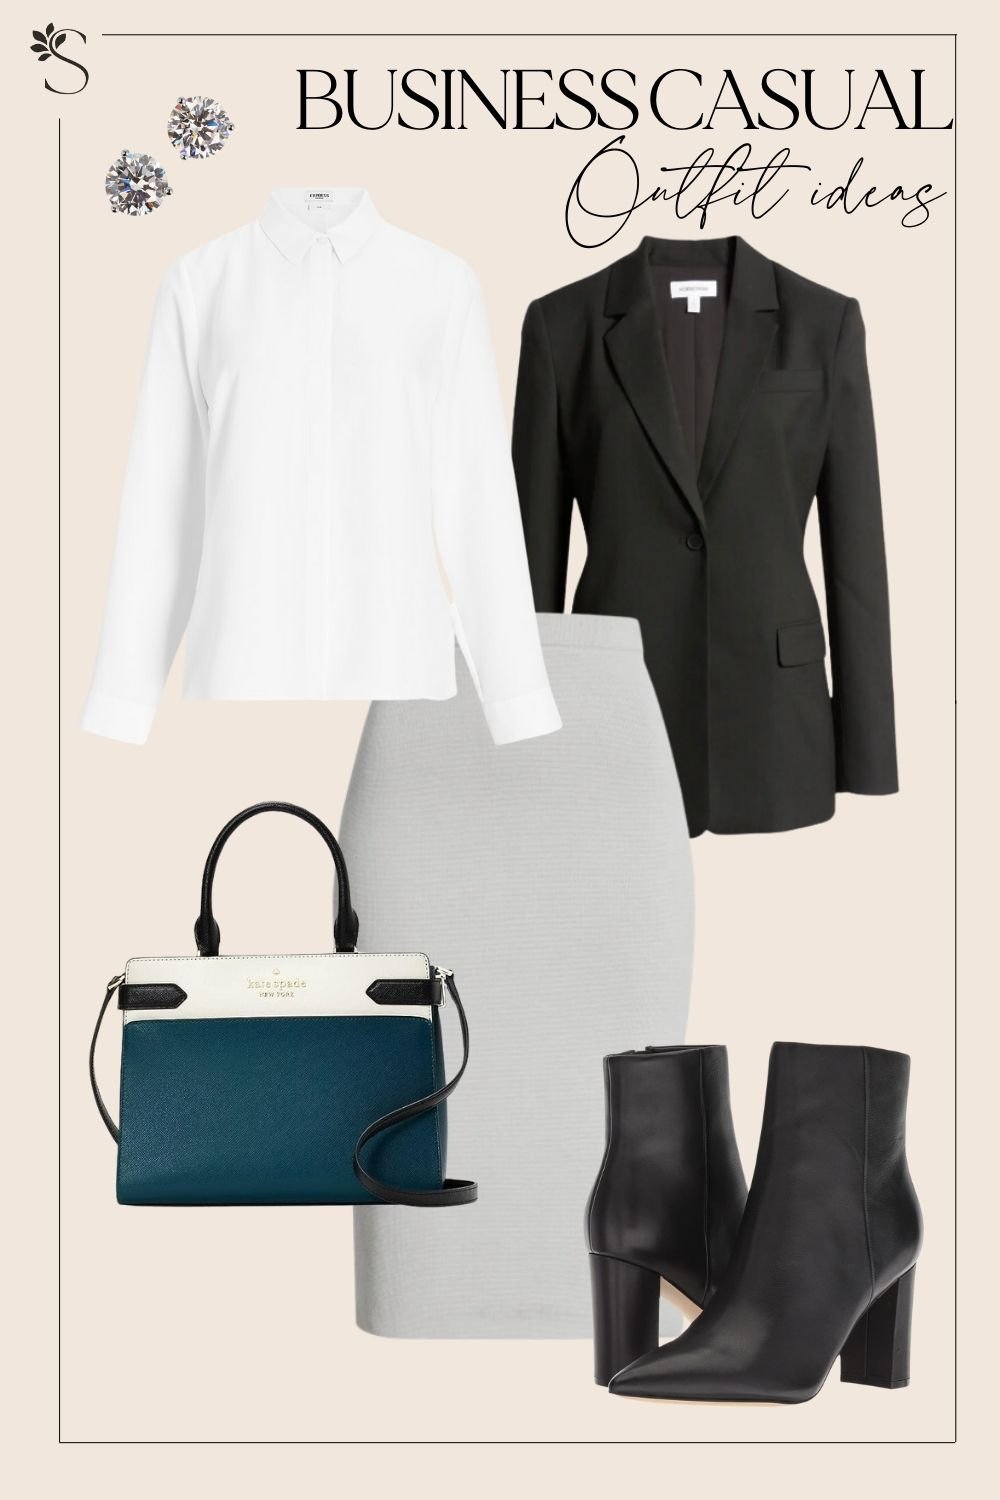 Business Casual Outfits That Will Enhance Your Wardrobe for the Spring